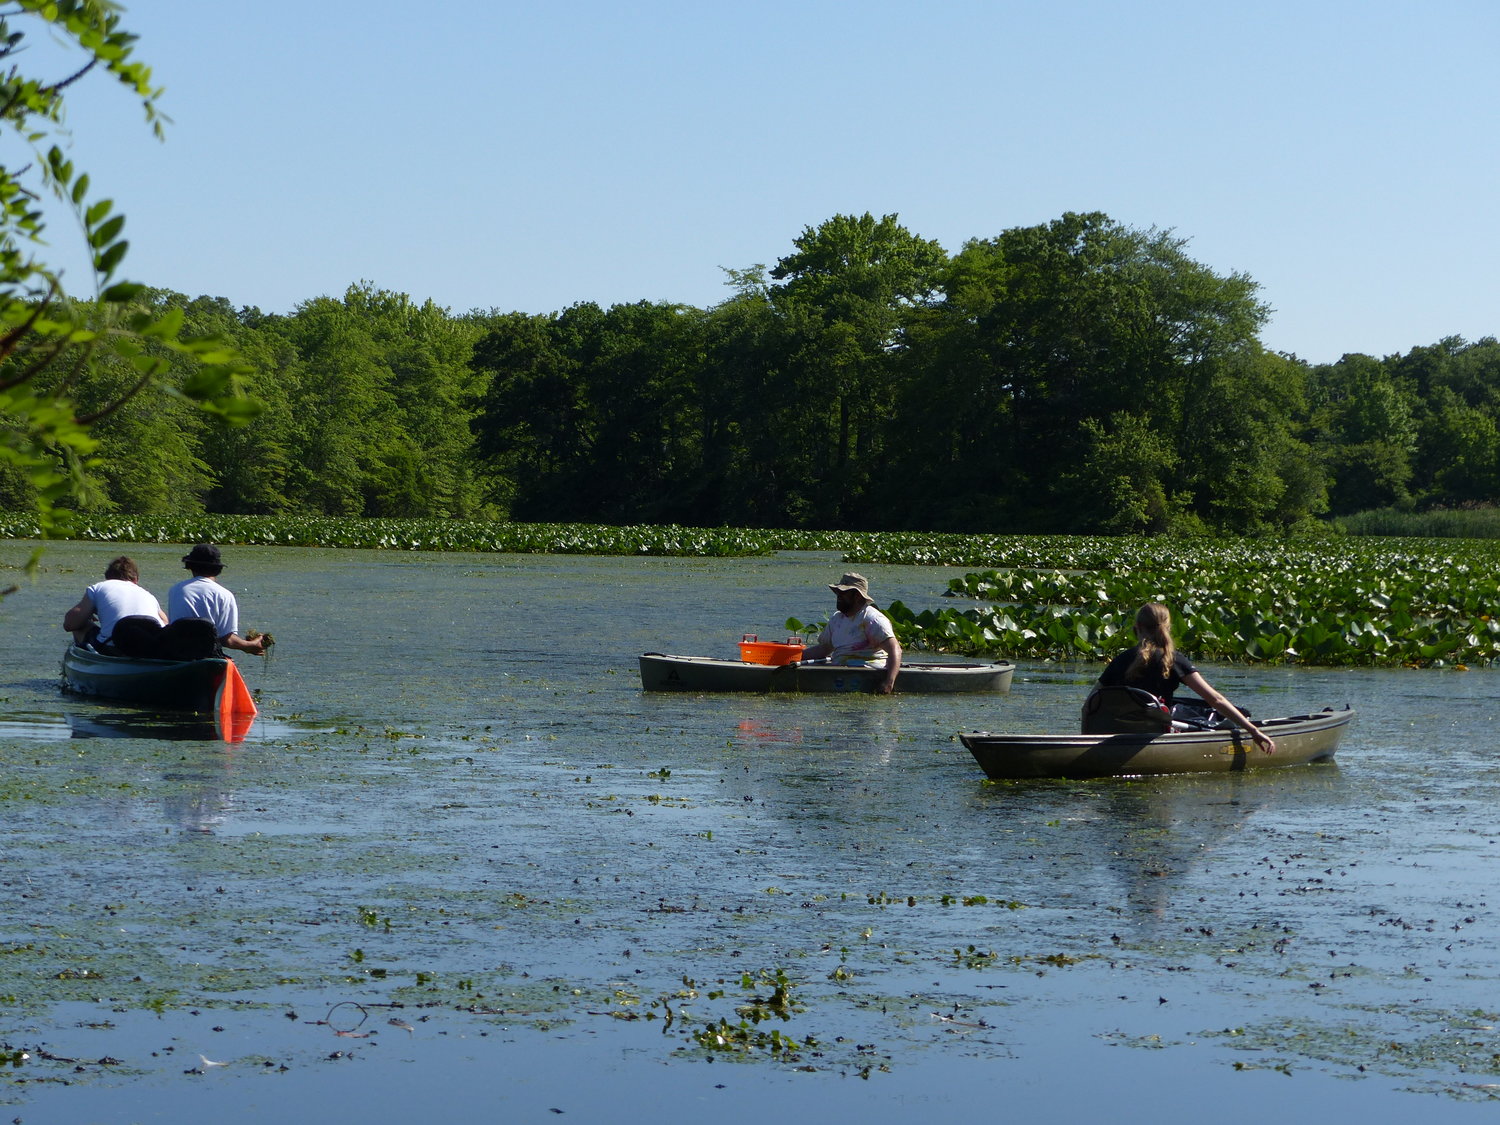 Department of Environmental conservation workers and volunteers pulled water chestnut out of the pond in kayaks and canoes, which aren't usually allowed in Nassau County ponds.